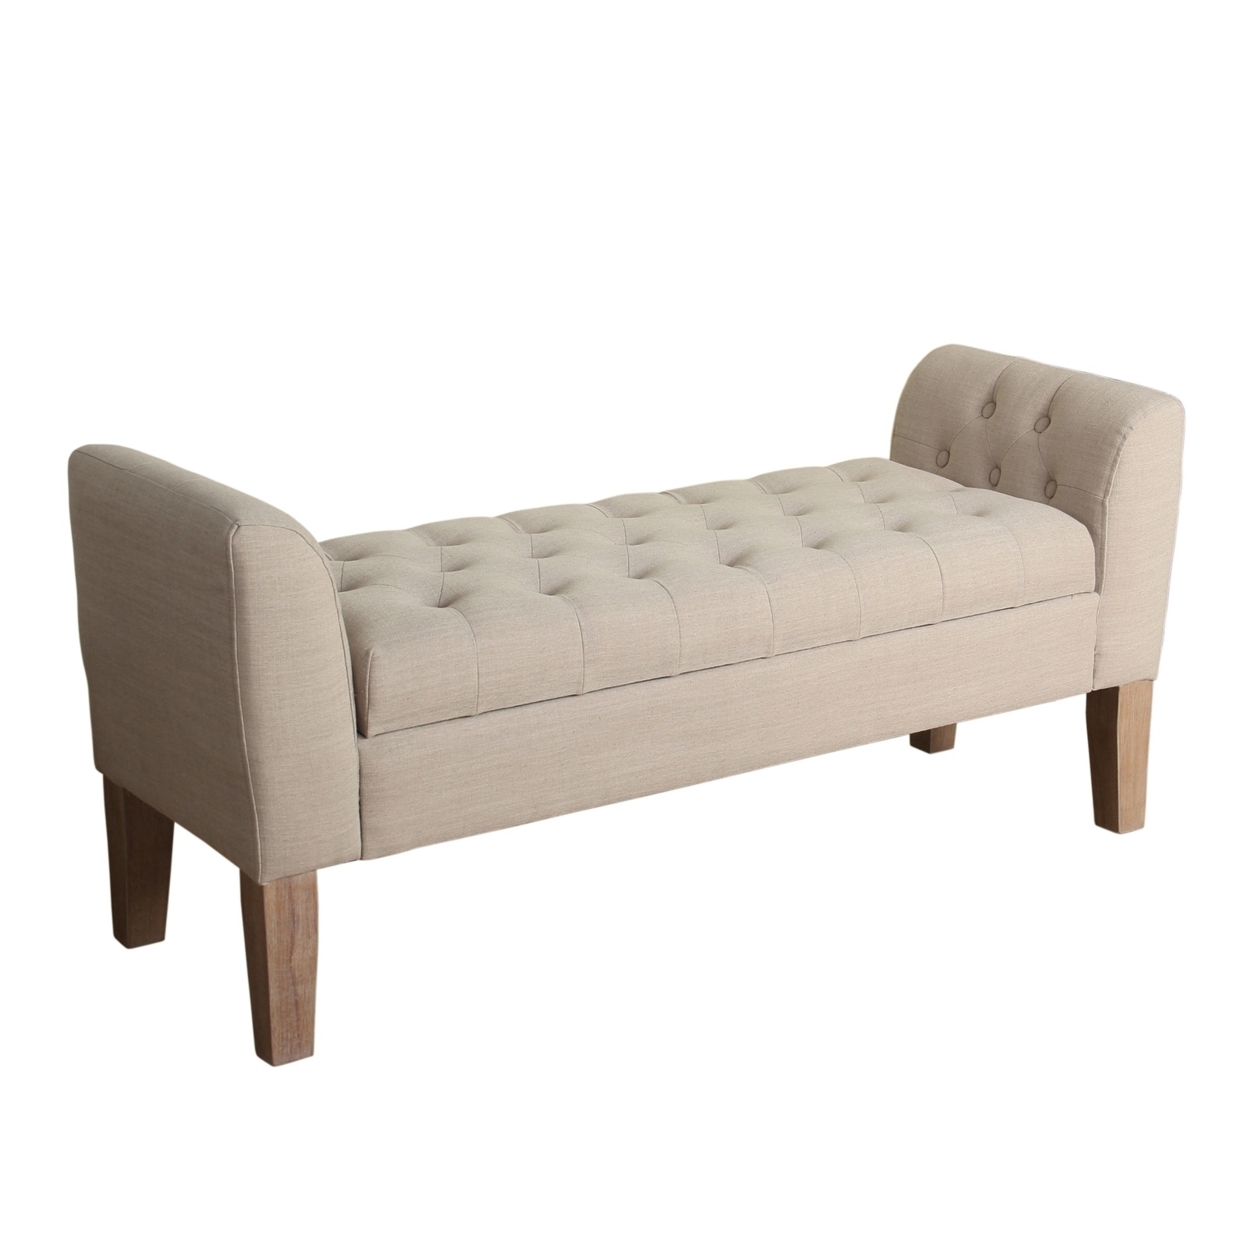 Fabric Upholstered Wooden Bench with Button Tufted Lift Top Storage, Beige